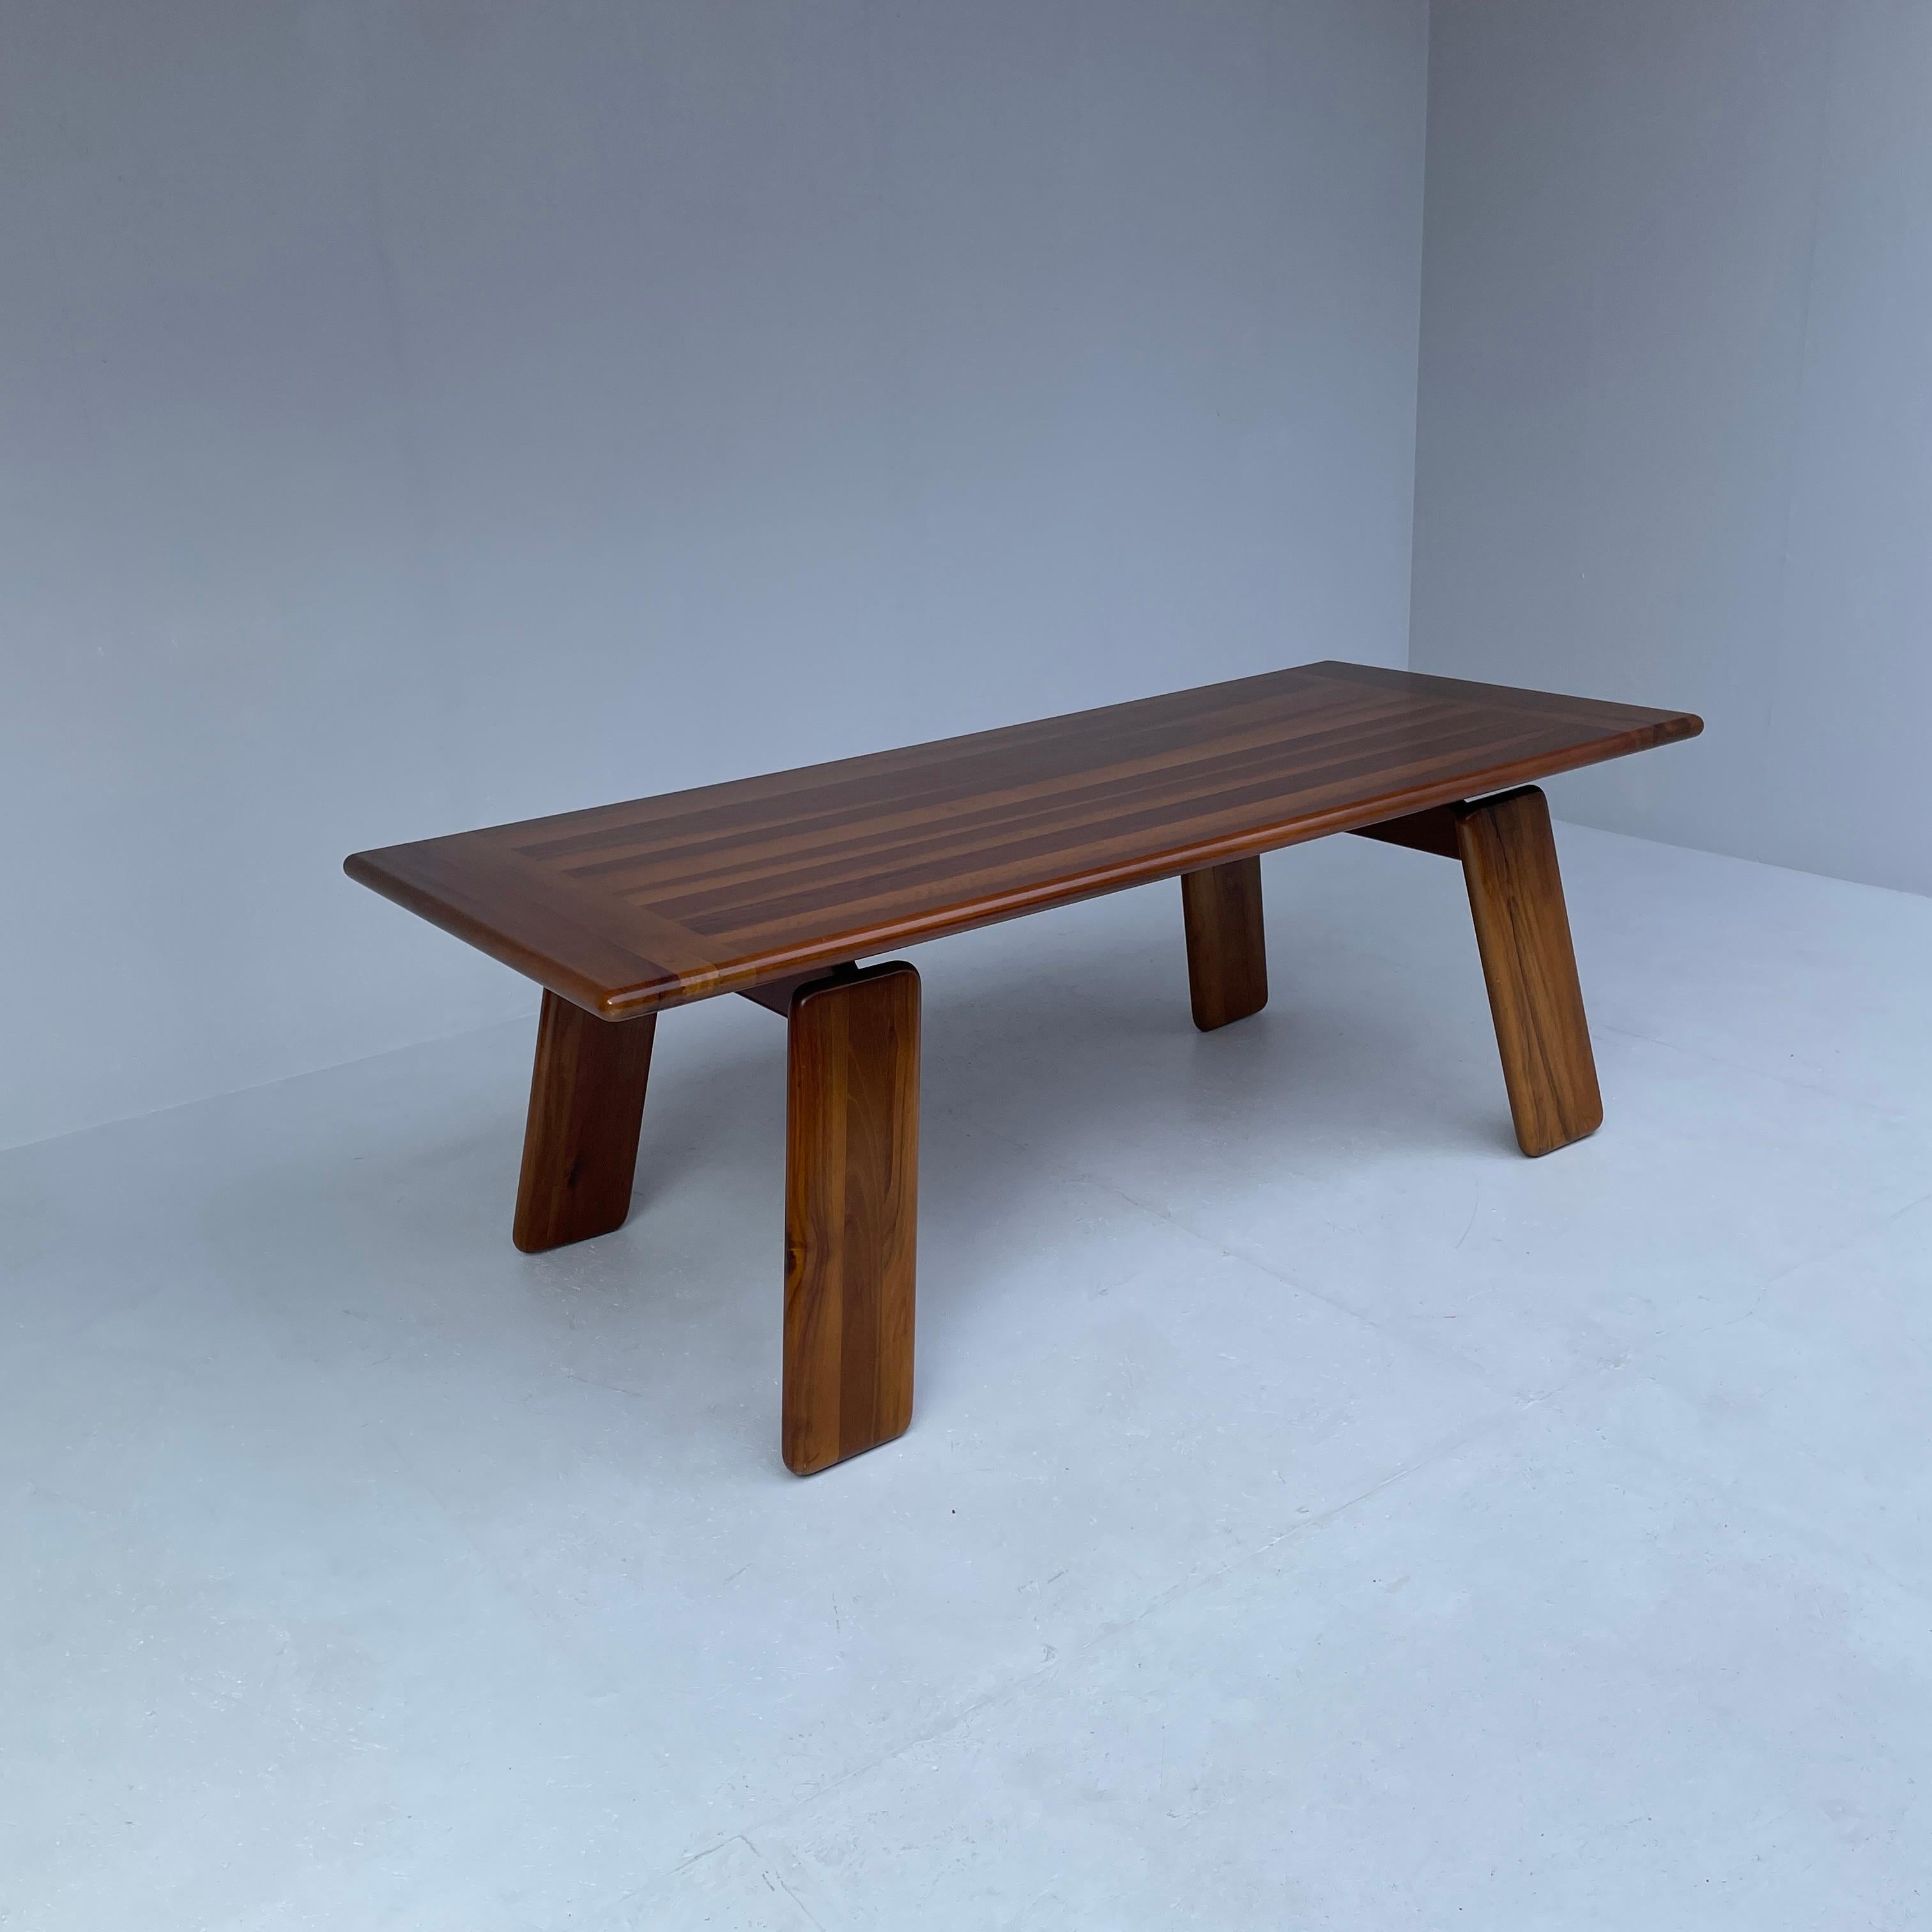 Mario Marenco for Mobil Girgi, 'Sapporo' dining table, walnut, Italy, 1980s.

Dimensions: H74.5 cm, W210 cm, D90 cm

The table is in excellent condition!

An exceptional dining table by the Italian designer Mario Marenco, featuring a high-level of